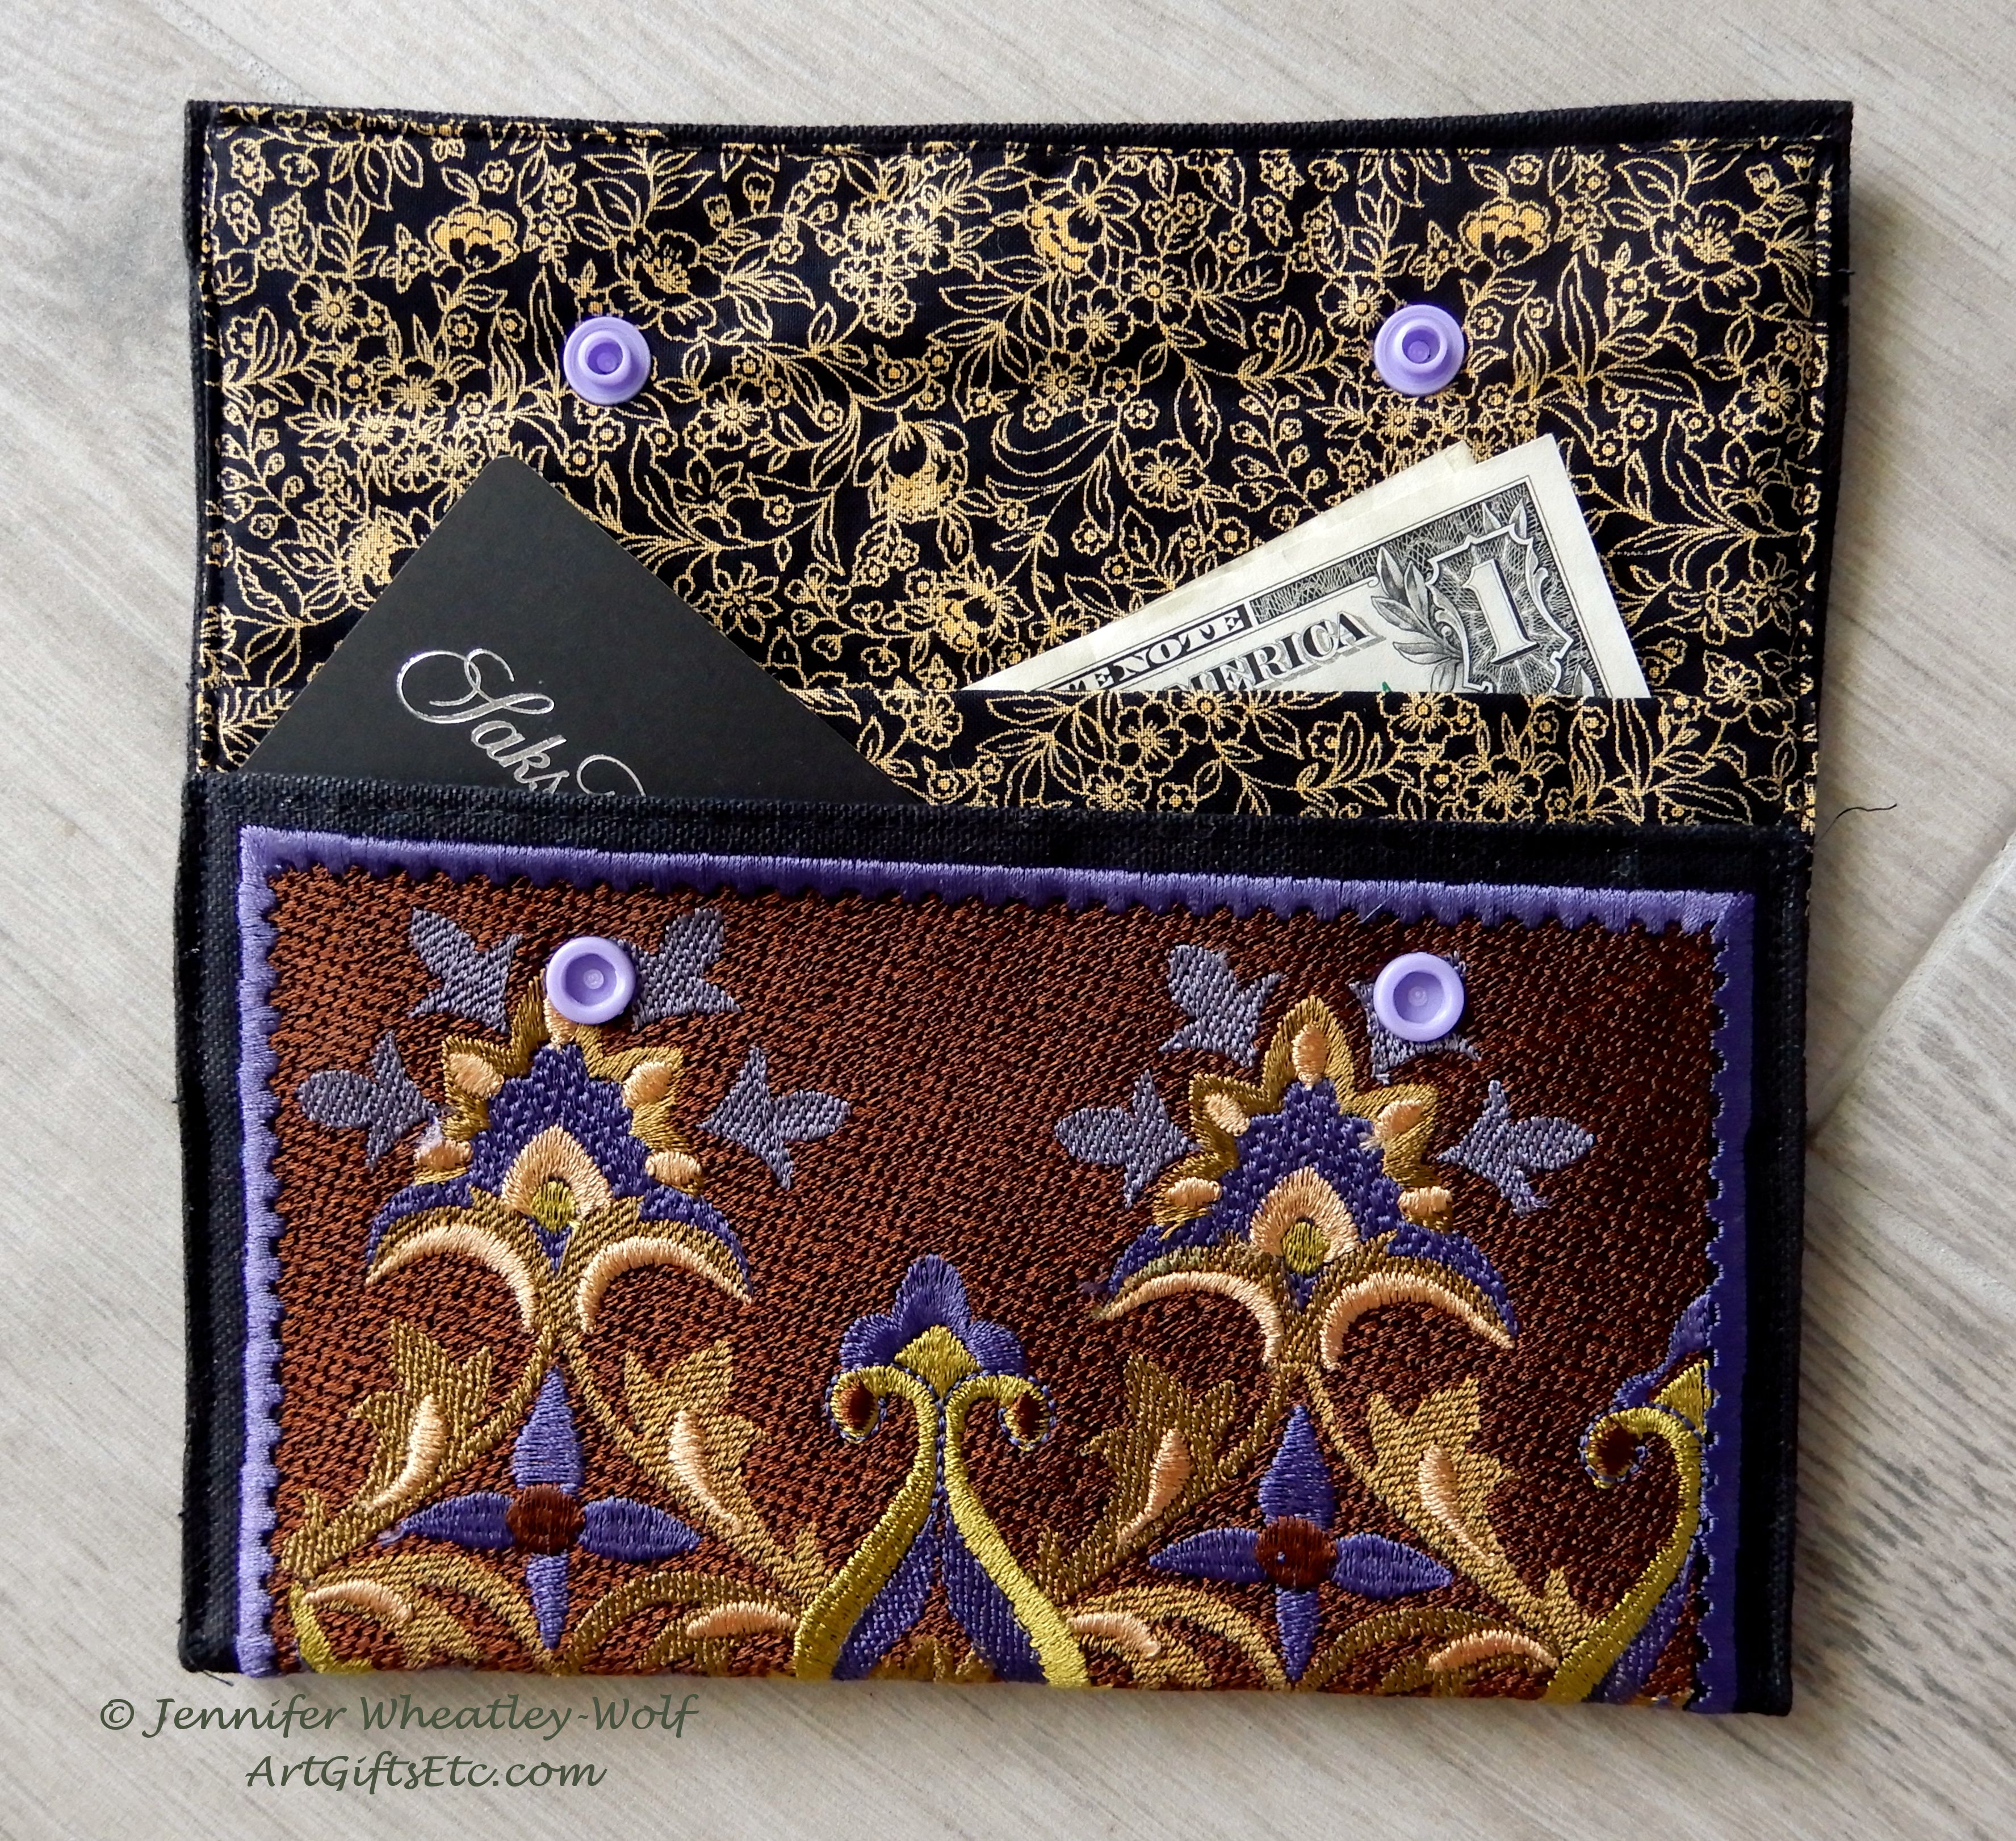 large-tapestry-embroidered-gold-purple-brown-wallet-open-Jen's-Bag-embroidered-bag